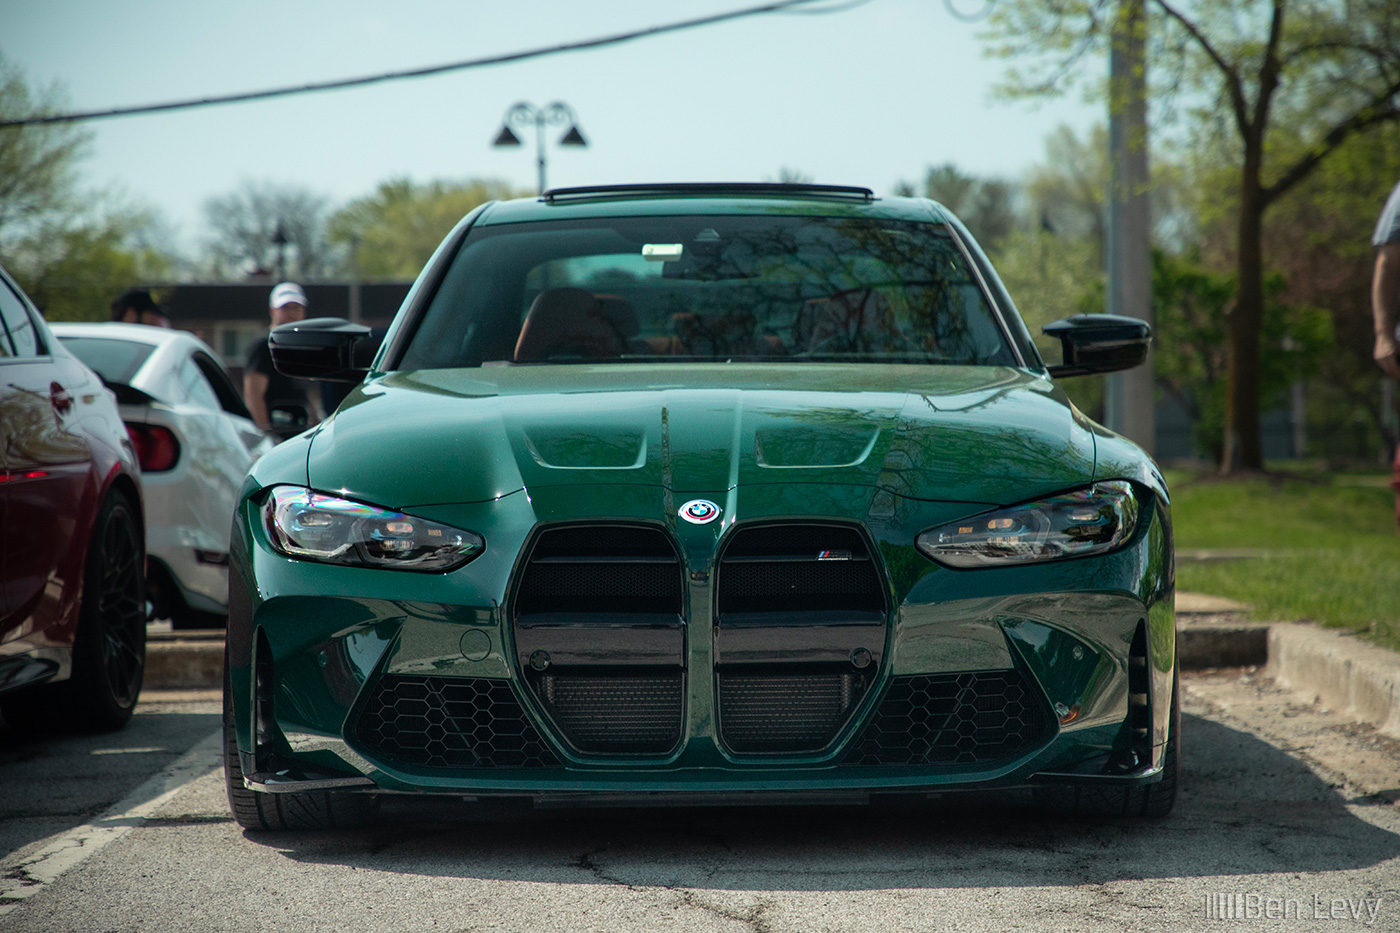 Front of Green BMW M3 at Car Meet in Lisle, IL